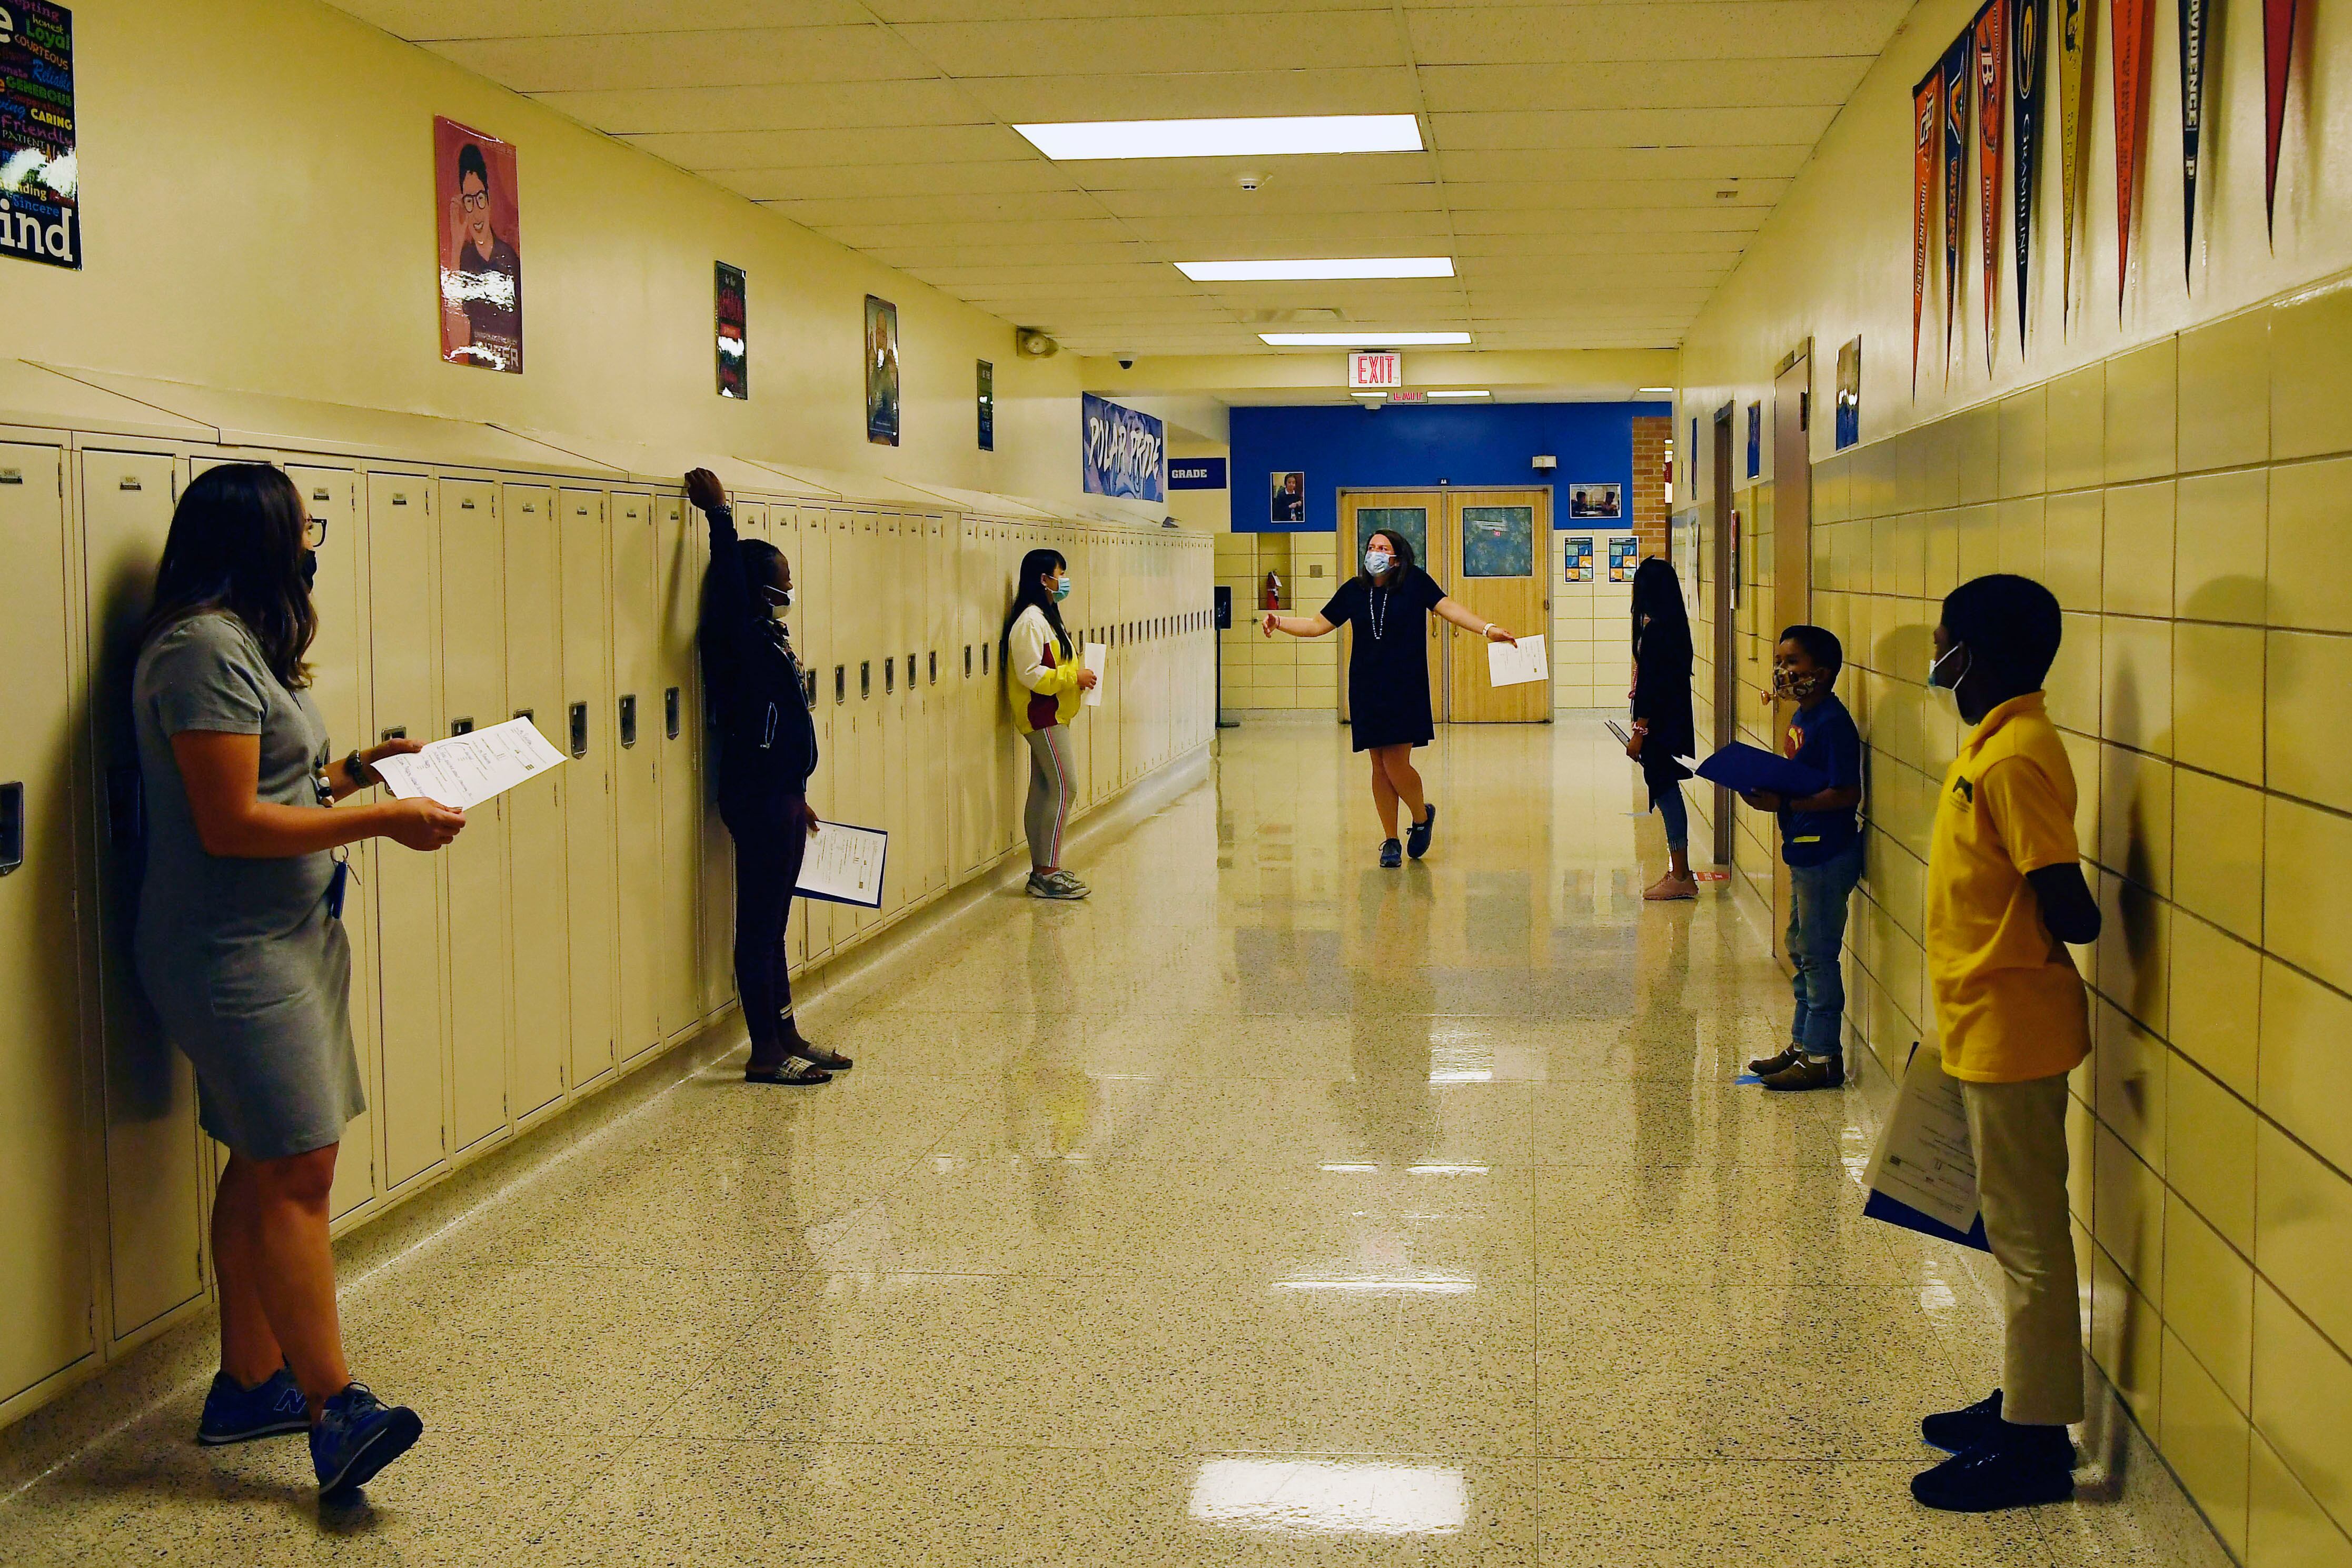 Middle school students are spaced out in a hallway with lockers, during a conversation exercise.